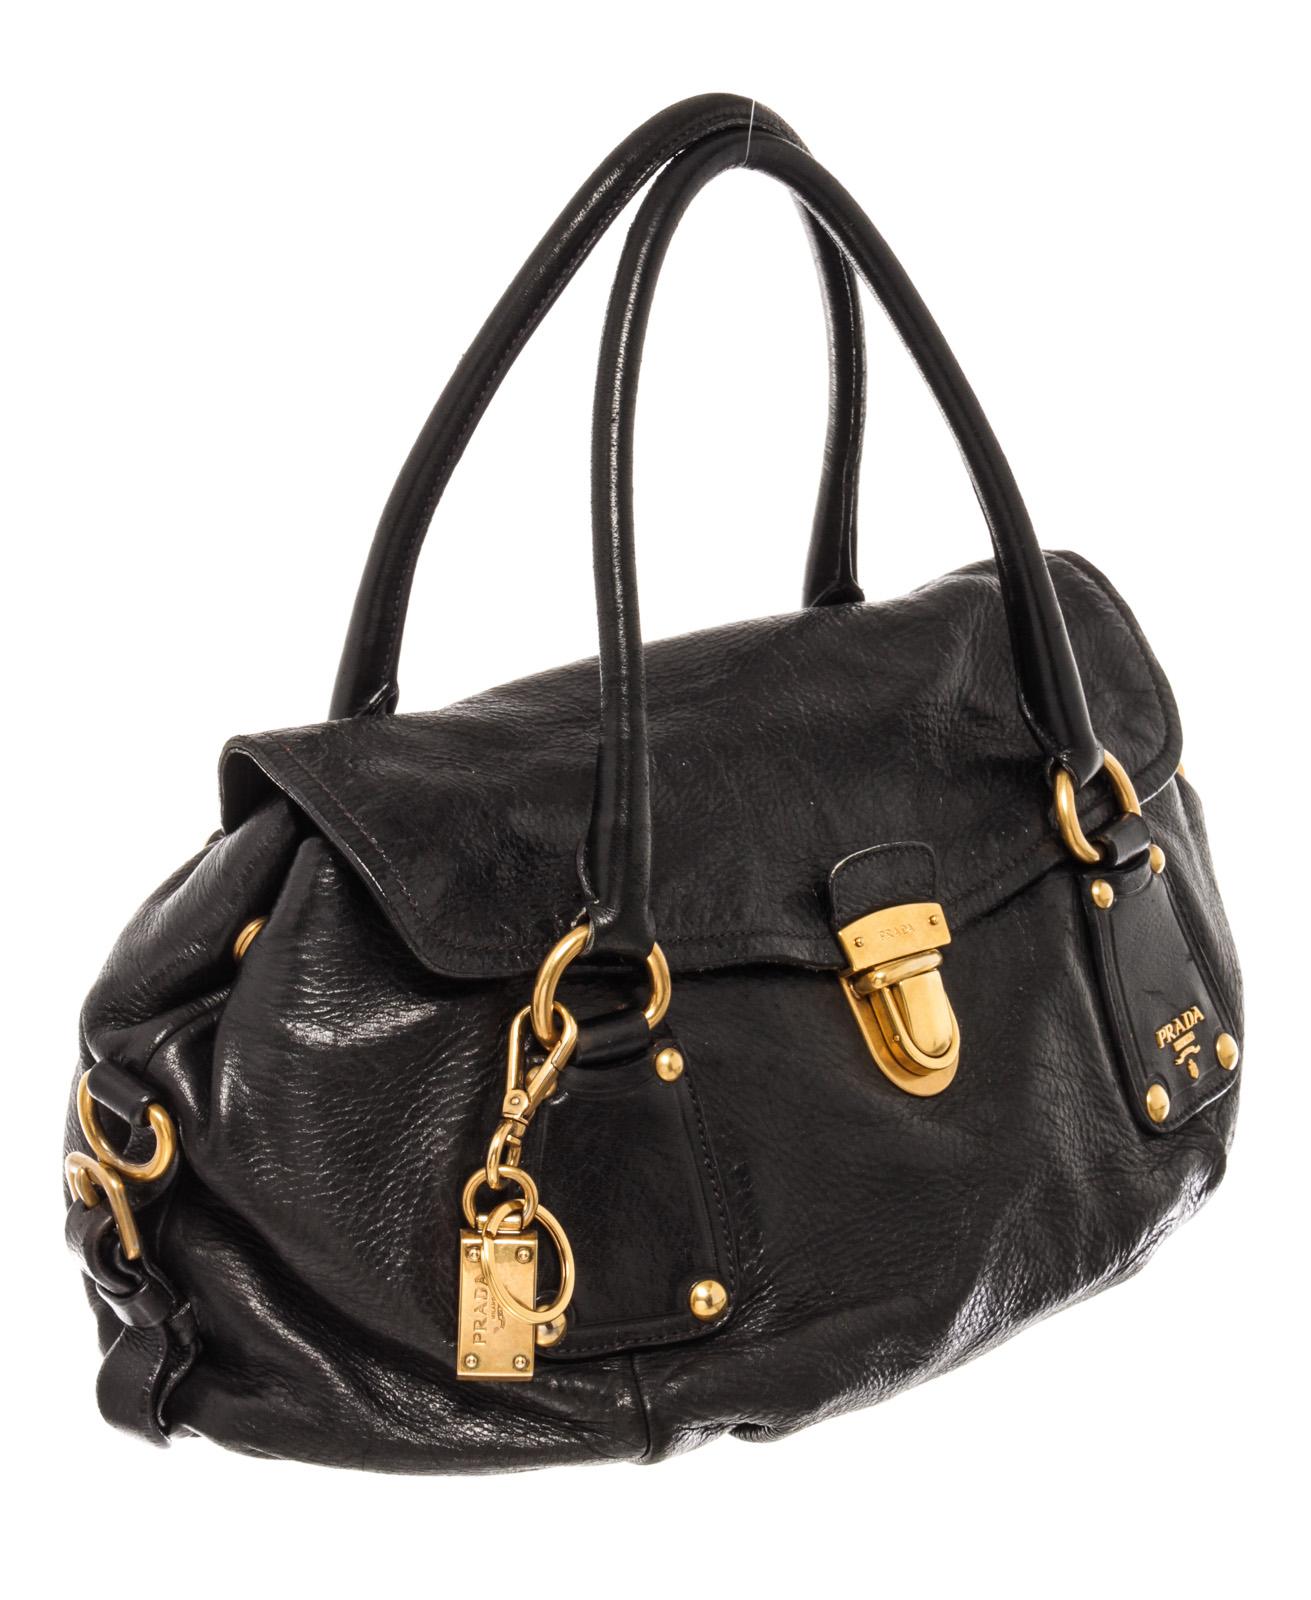 Prada Push-Lock 2way Bag has gorgeous black calfskin leather with and a gold-tone pushlock closure. It features detachable shoulder leather strap, double rolled leather handles and black Prada signature fabric interior lining with one stud-closure